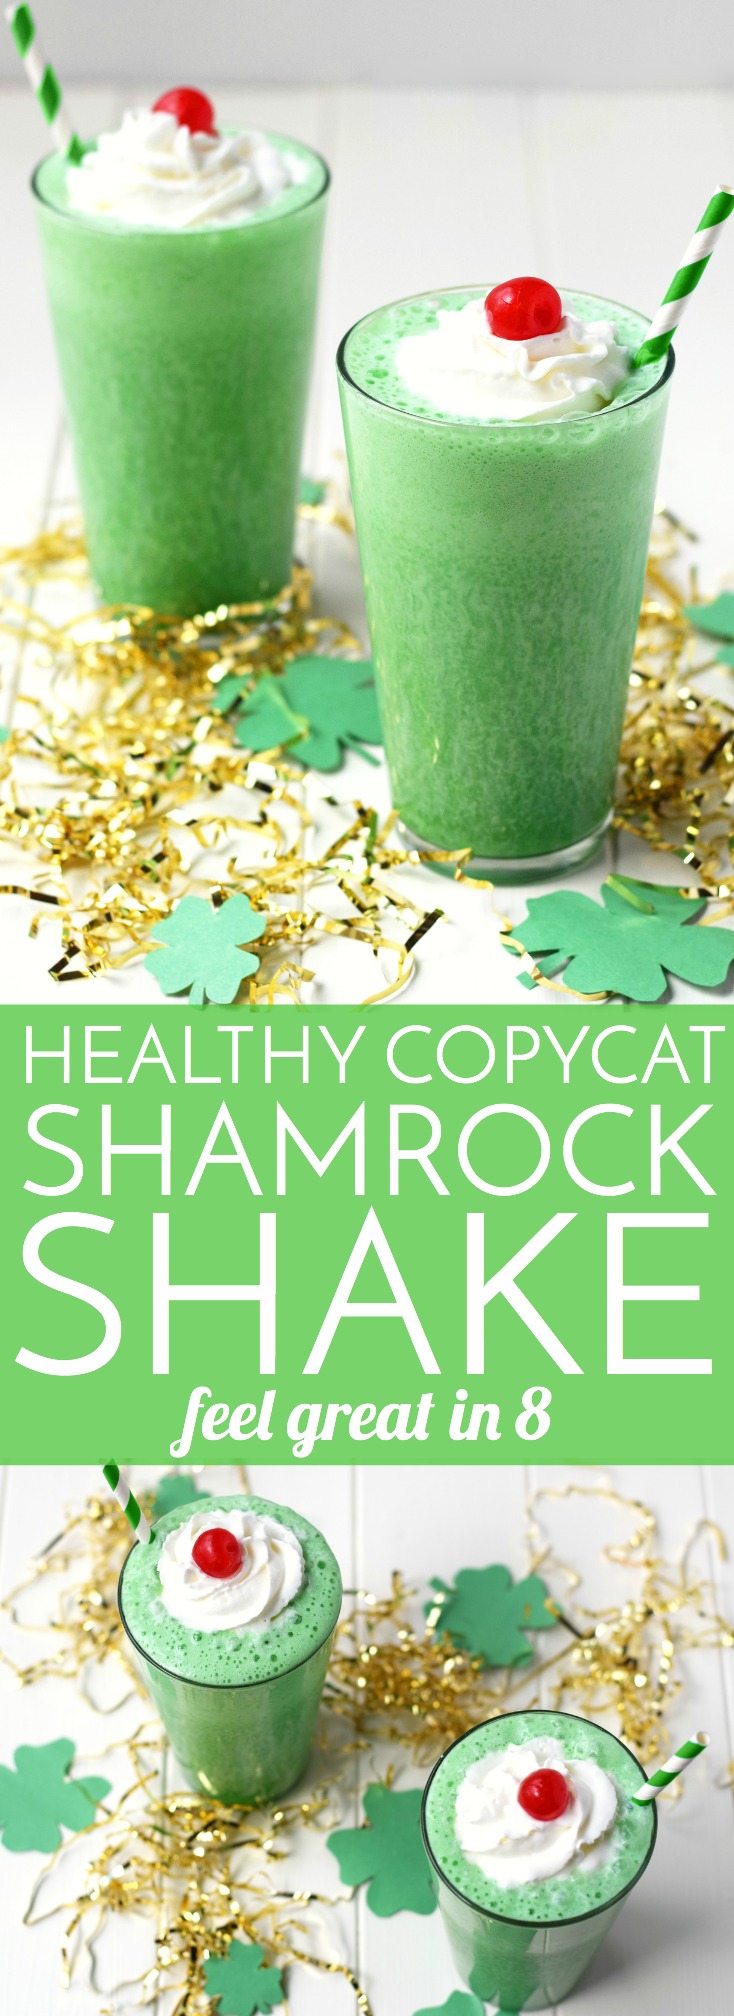 Healthy Shamrock Shake Recipe - This healthy copycat recipe is the perfect 160 calorie treat to help you avoid the drive-through!